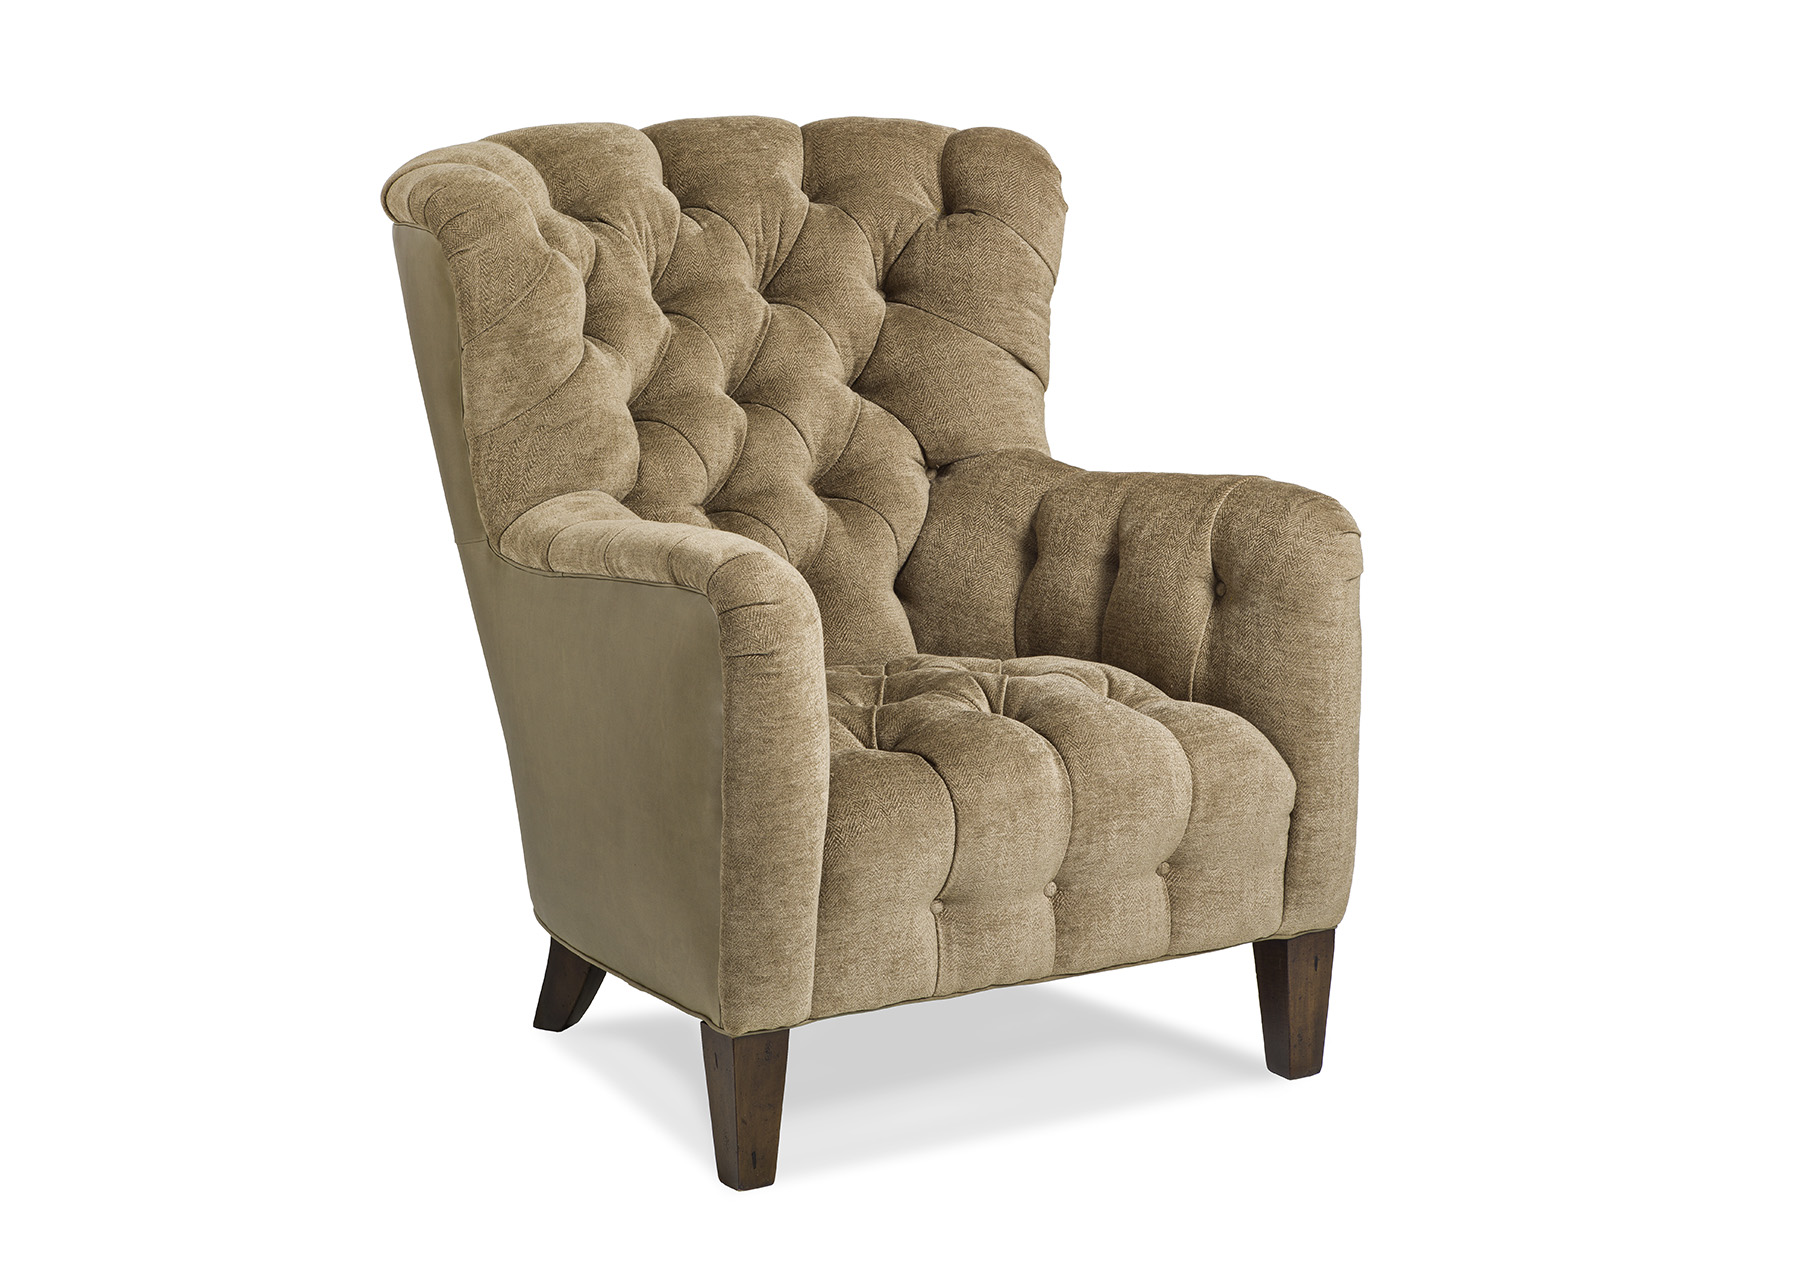 SUMPTUOUS TUFTED SEAT WING CHAIR